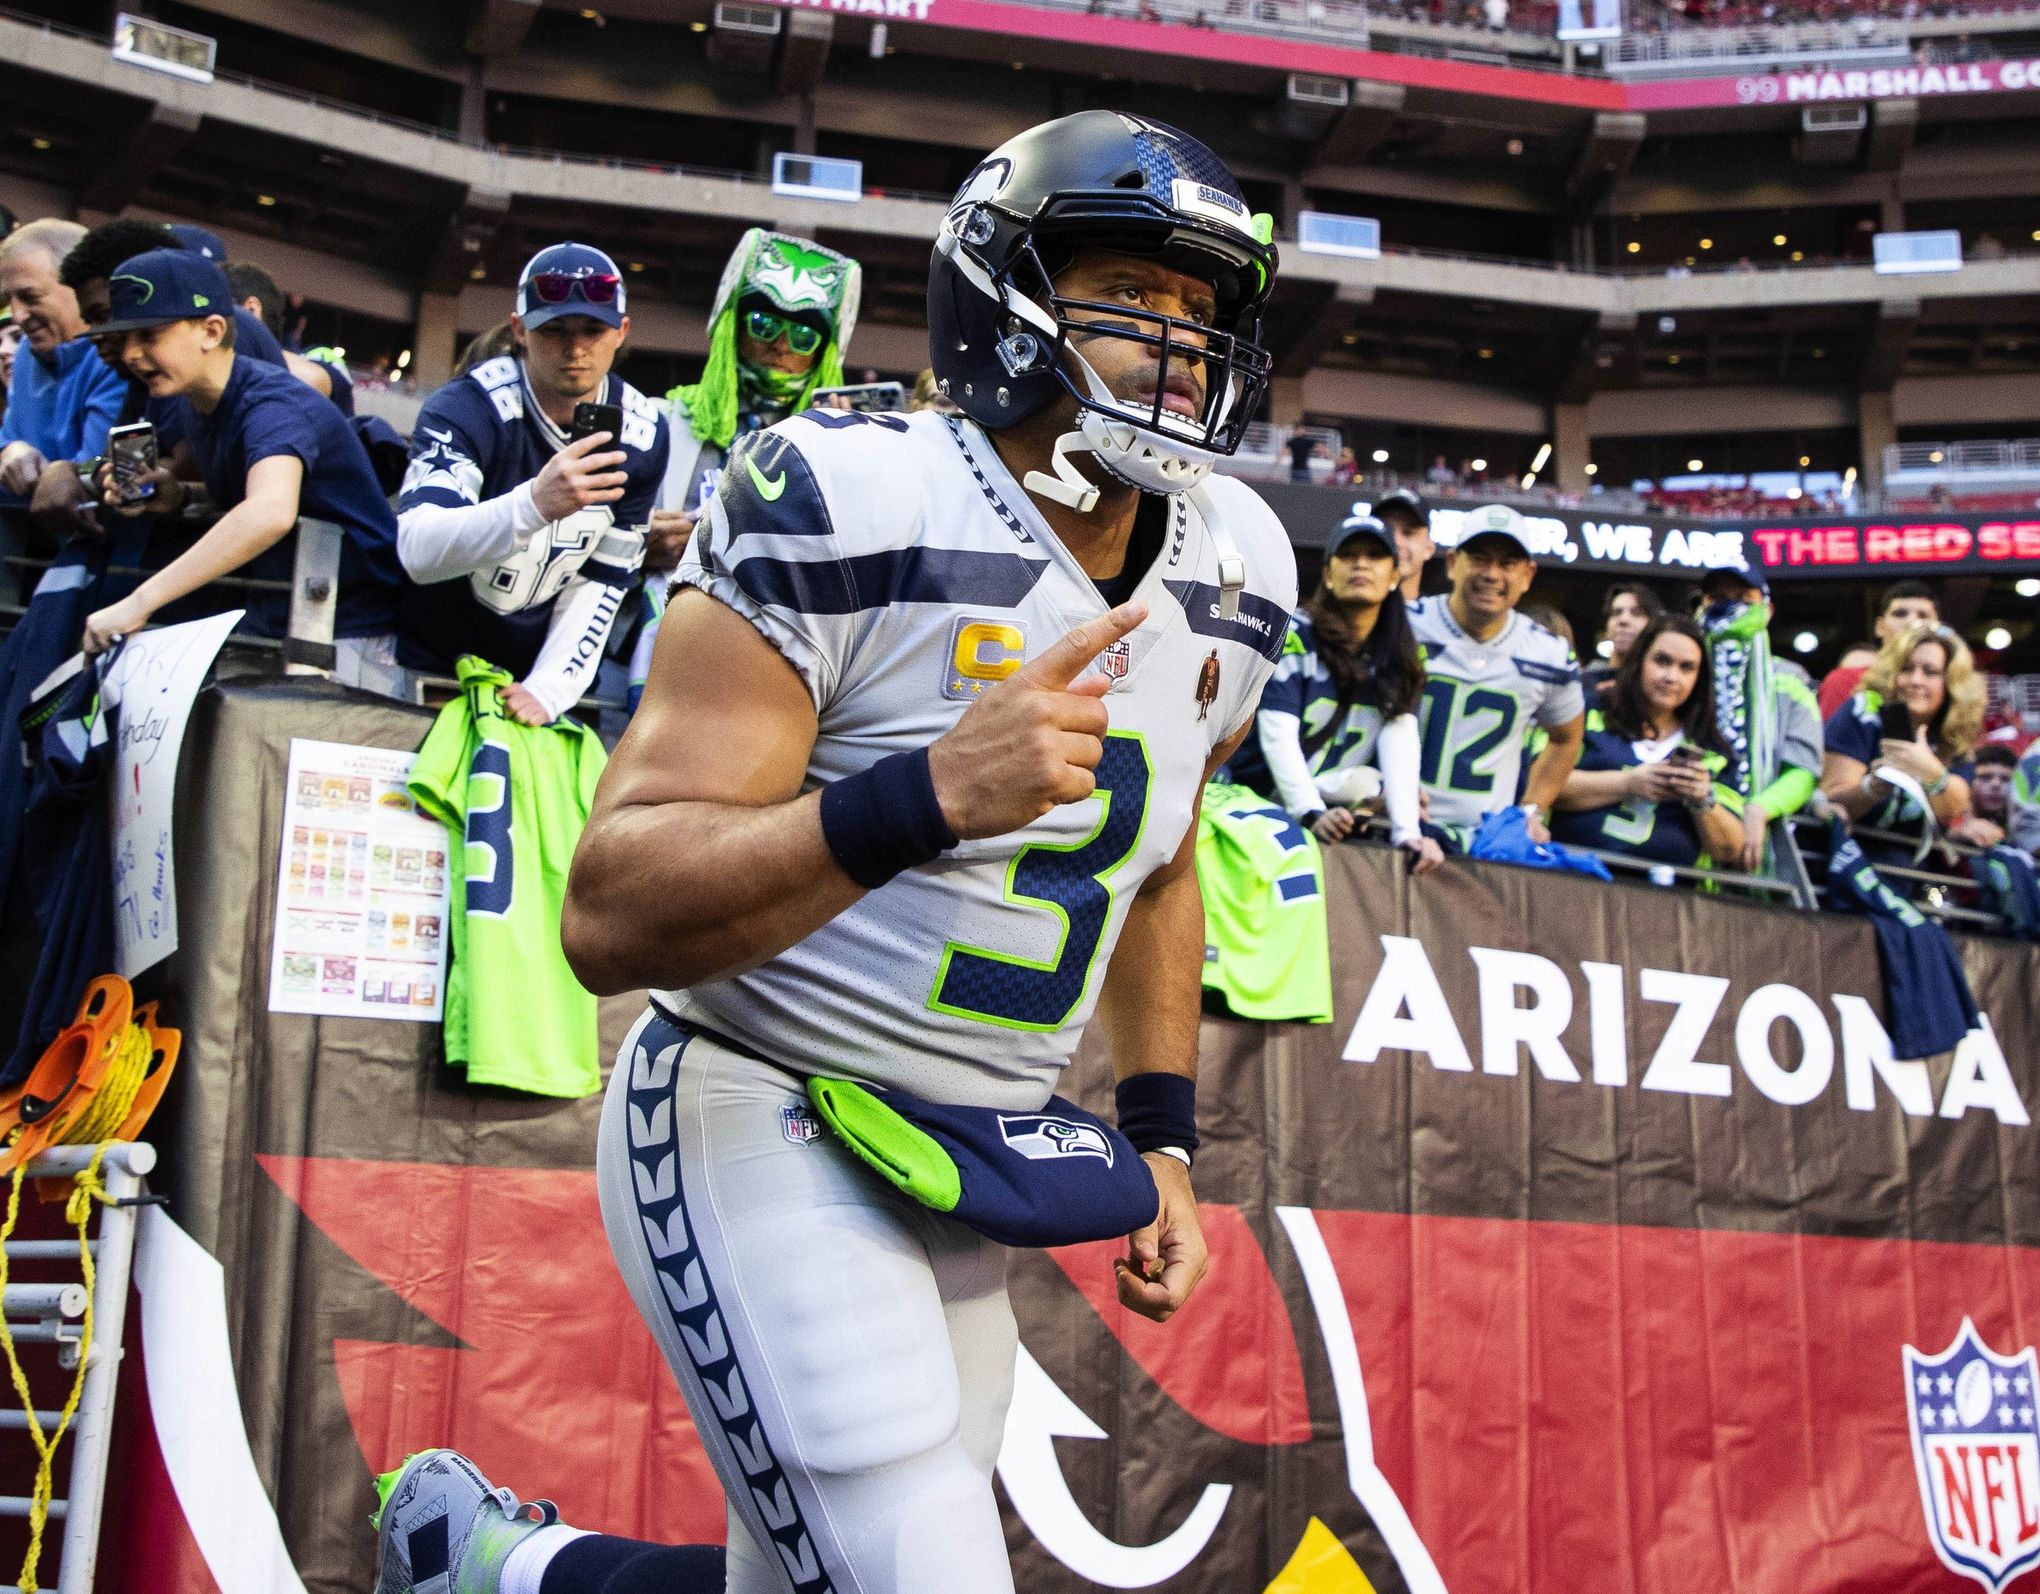 Russell Wilson Stats, News and Video - QB